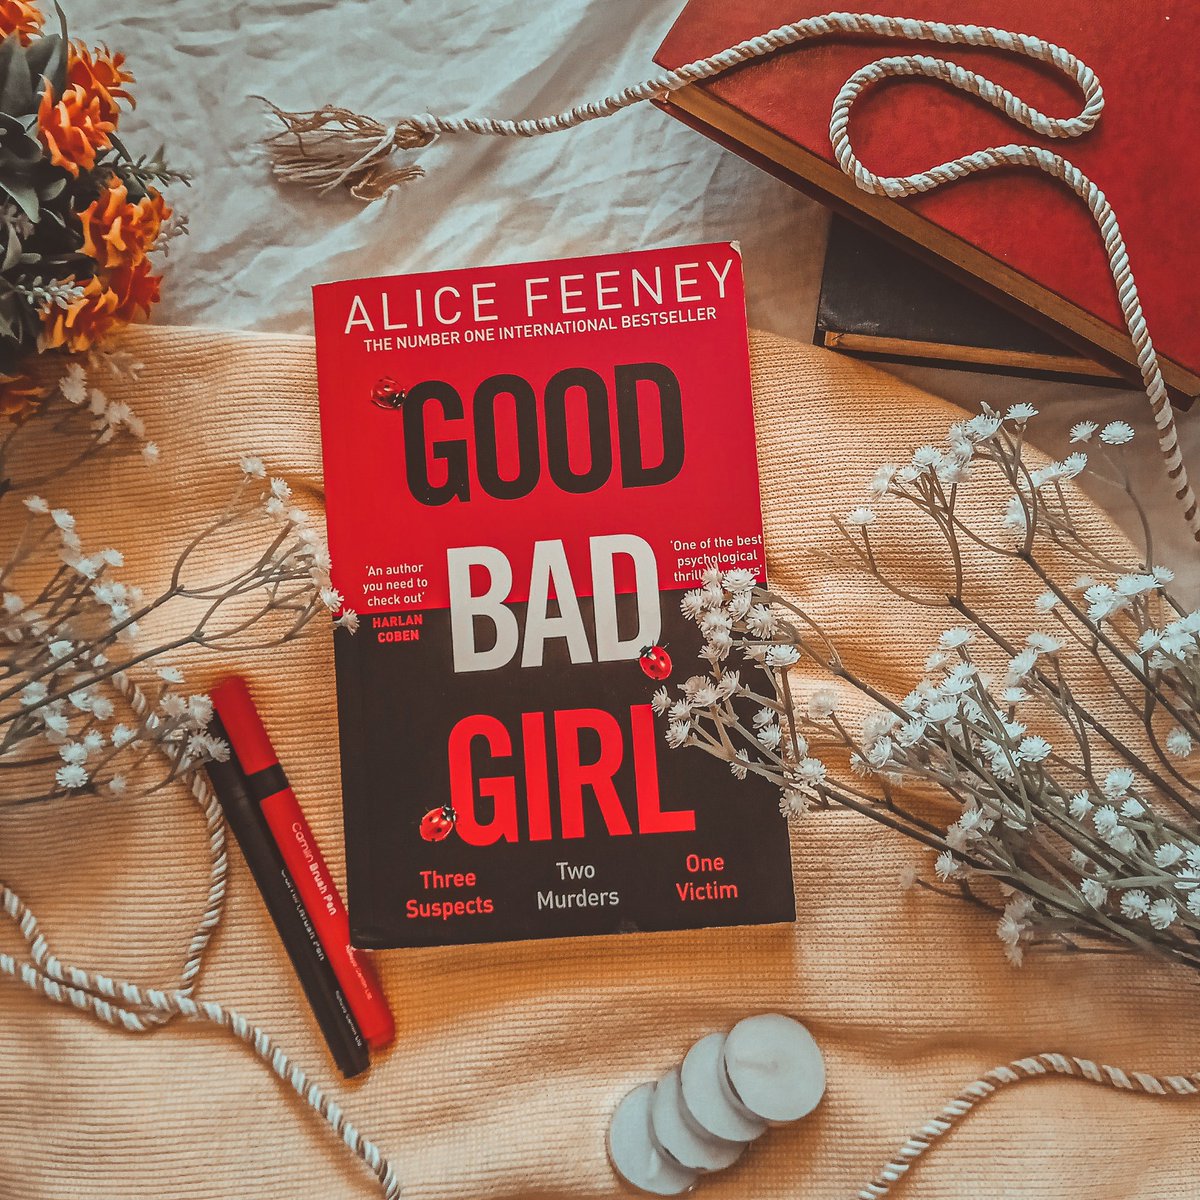 Posted the review of this amazing suspense novel, #GoodBadGirl 

Read this if you like:
🍂 Women main characters
🍂 Multiple povs
🍂 Dual Timelines
🍂 Breath taking suspense

Check out the complete review at: 
ivynest.wordpress.com/2023/10/16/goo…

#BooksWorthReading
#BookTwitter #bookstagram